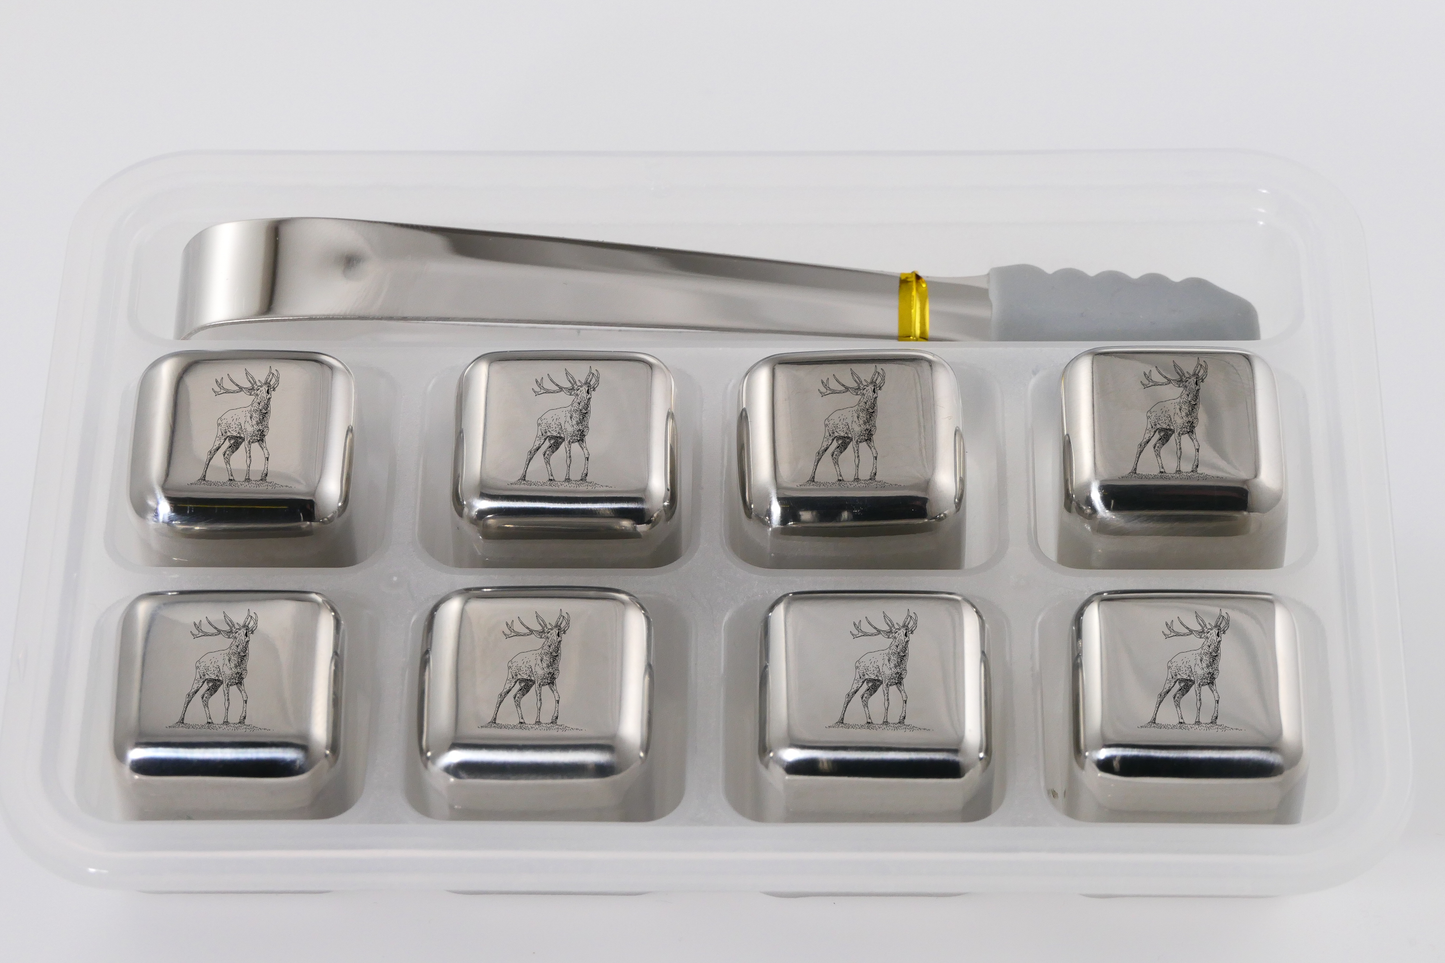 Stalking Gifts Stainless Steel Ice Cubes